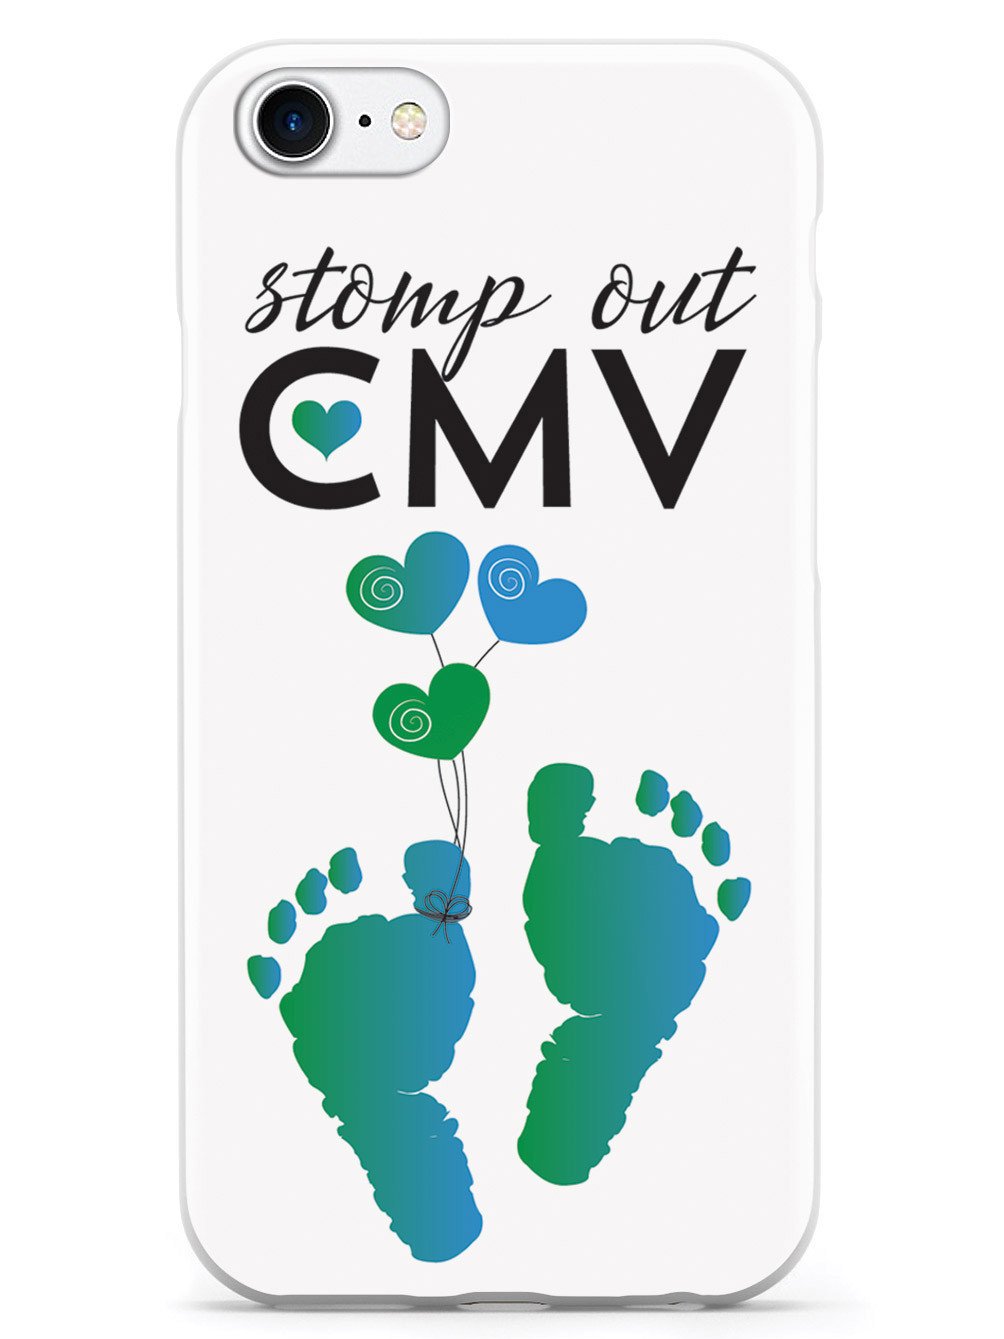 Stomp out Cytomegalovirus Case